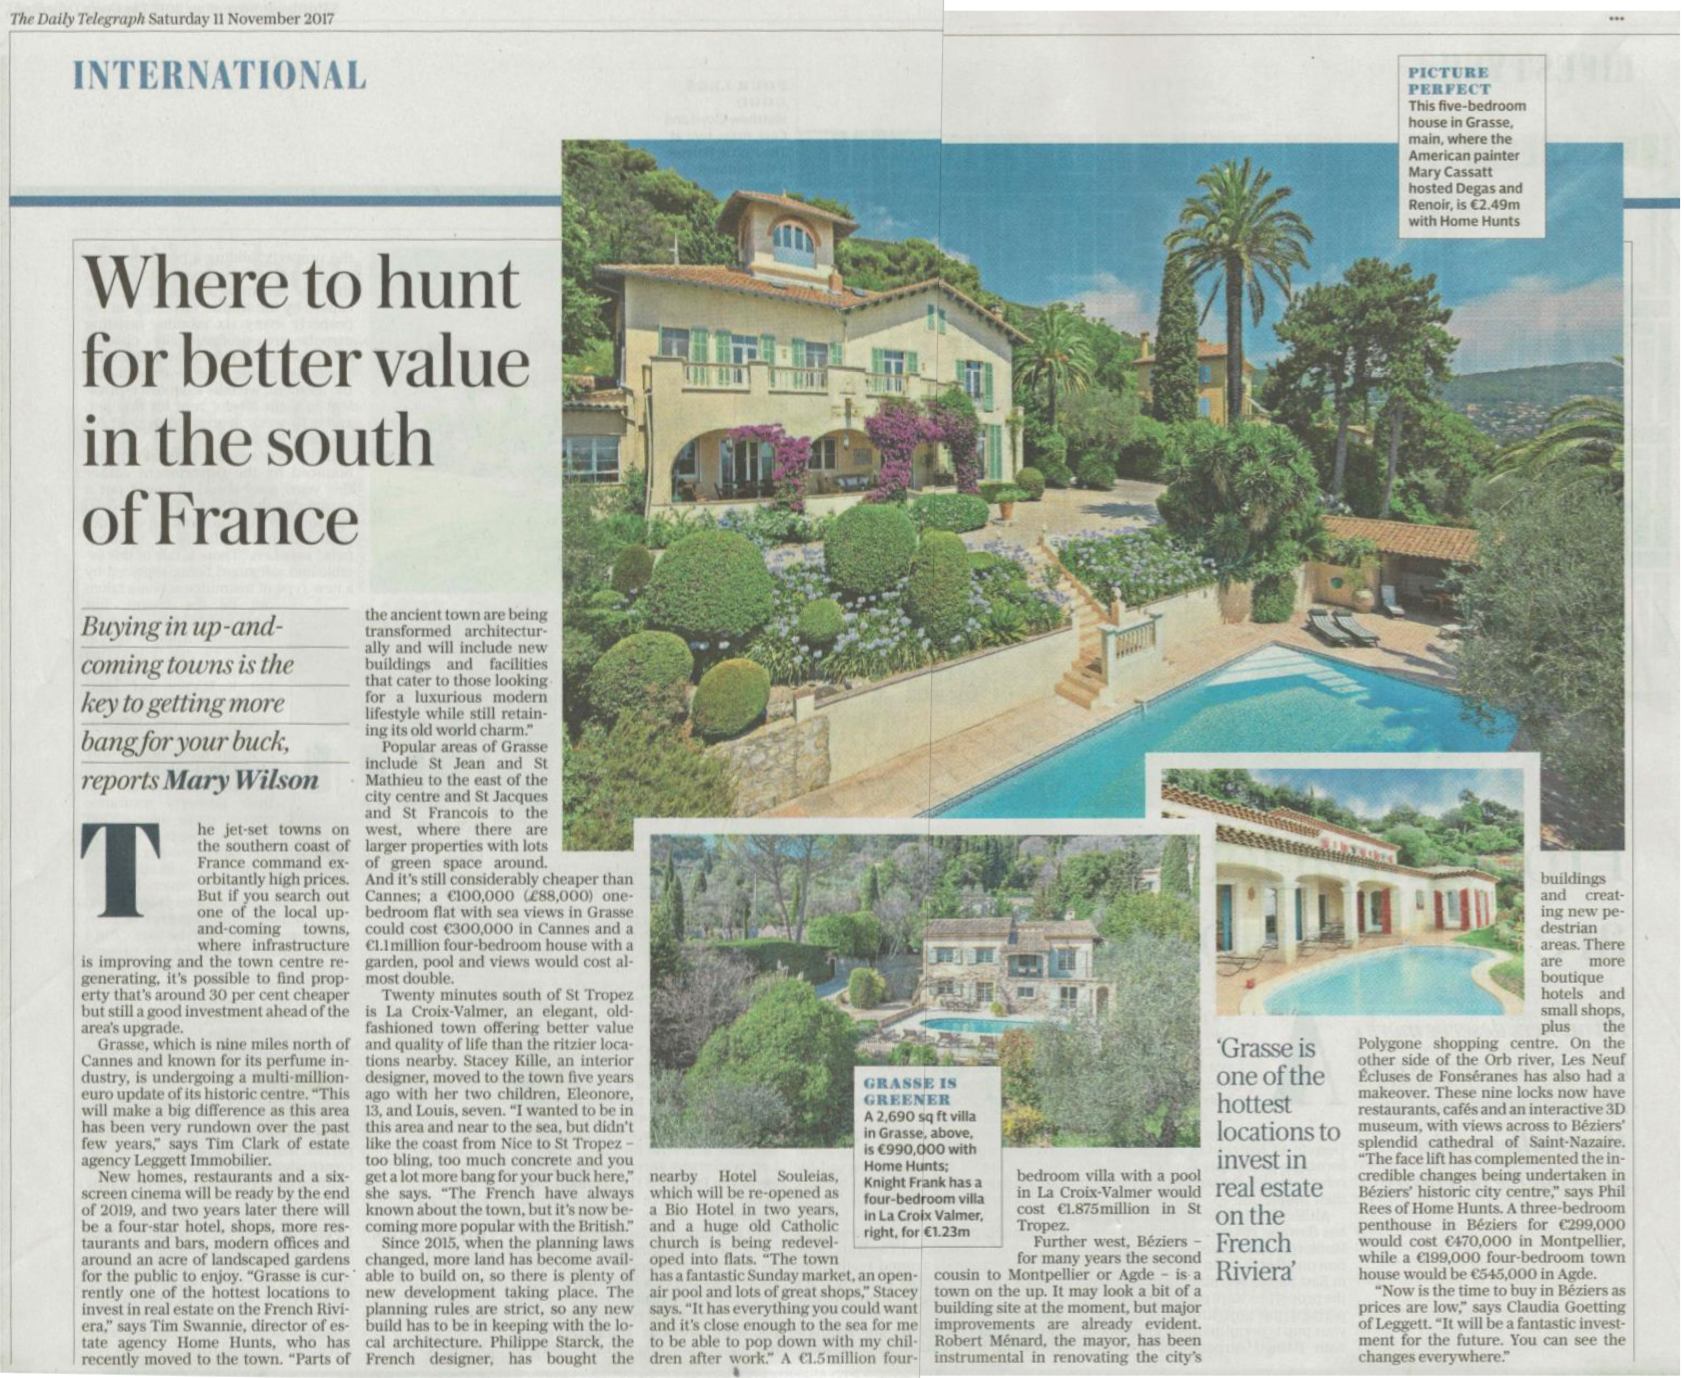 Telegraph – Where to hunt for better value property in the south of France